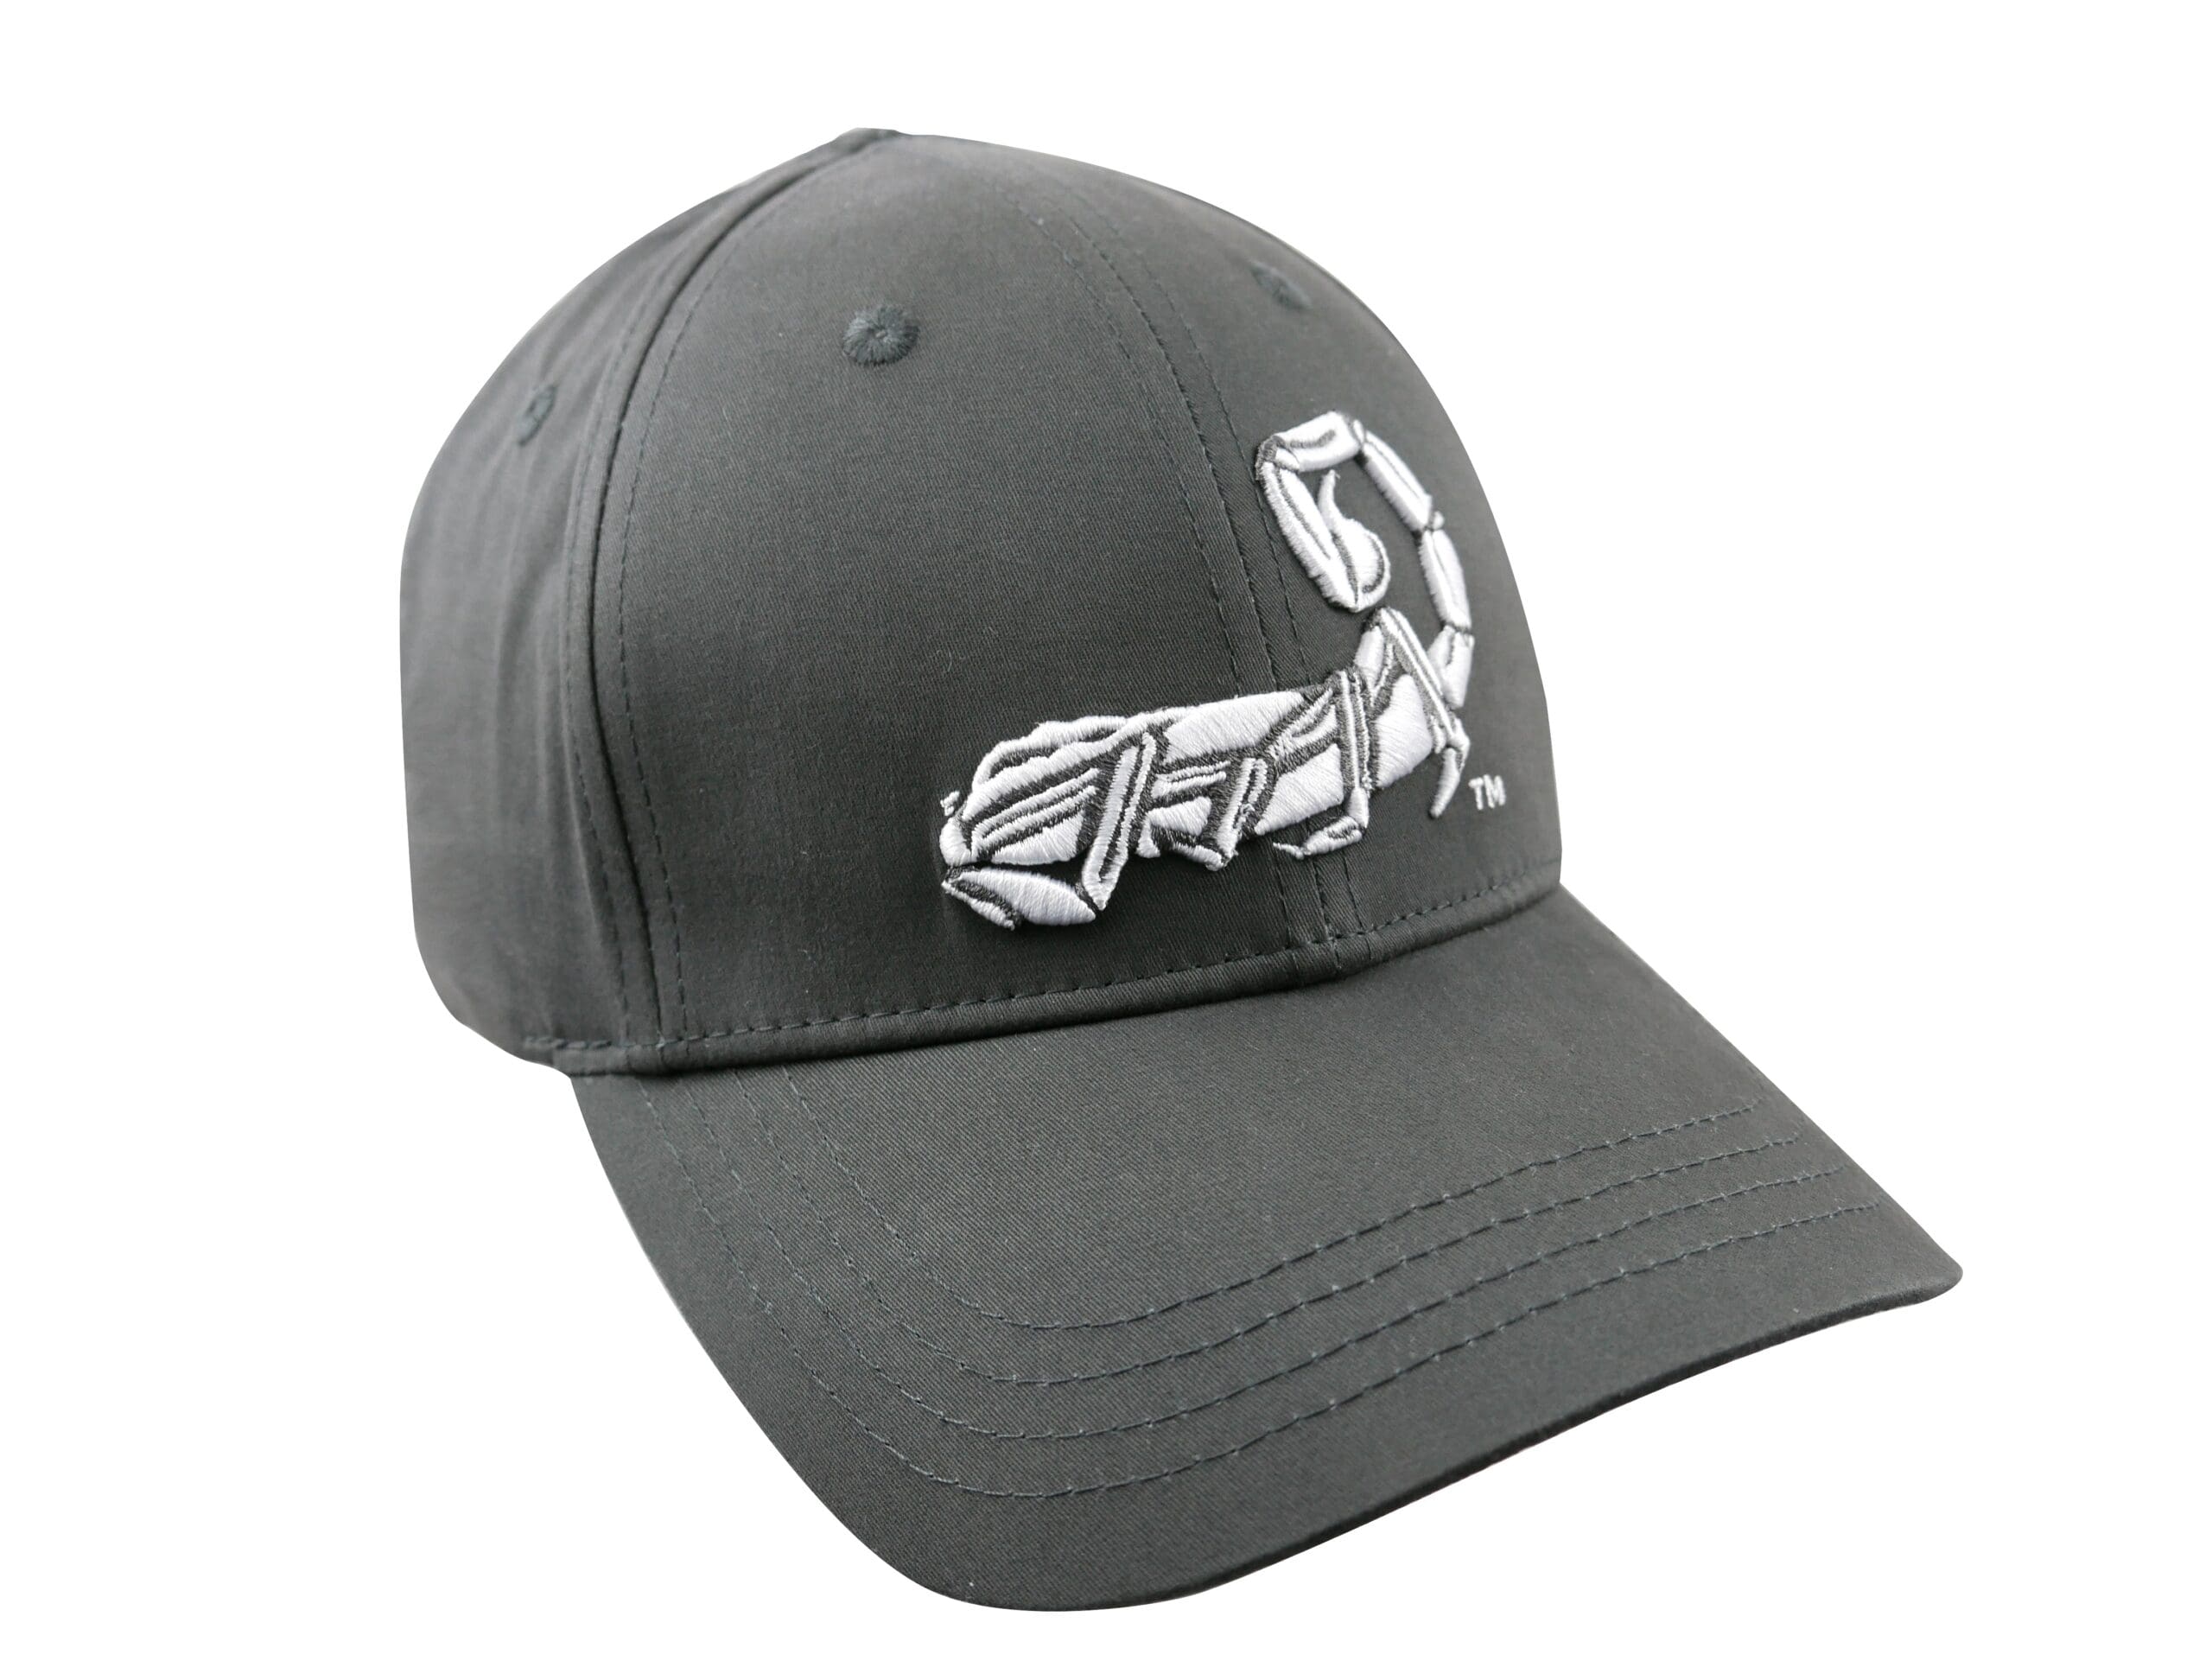 New Agilite Logo Stretch-Fit Hats - Soldier Systems Daily